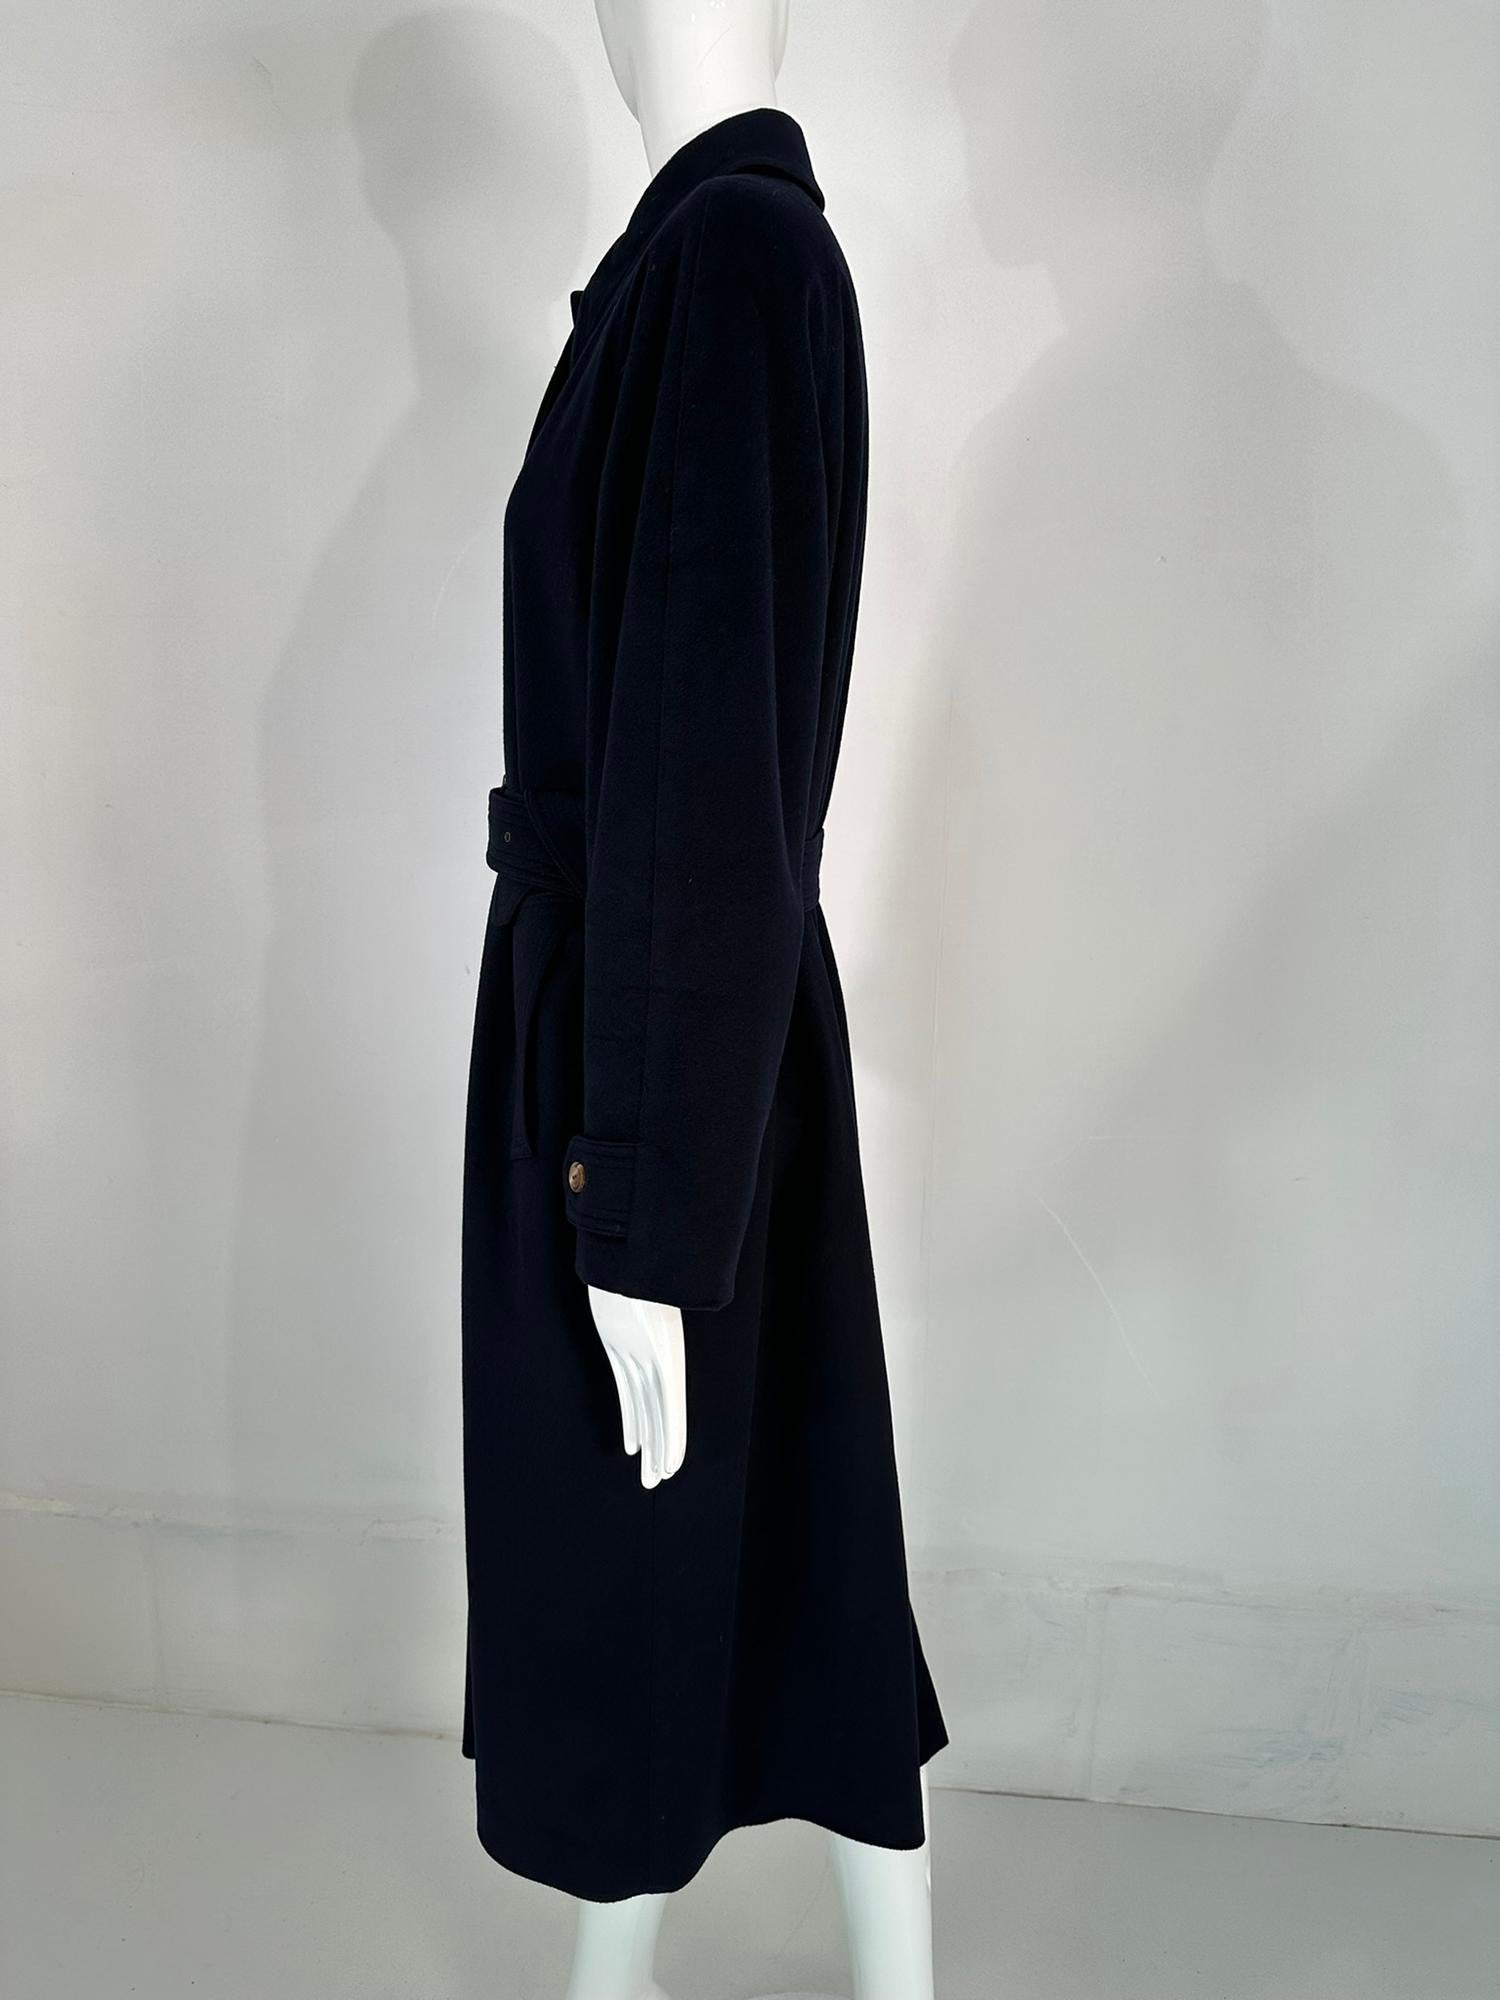 Giorgio Armani Classico Navy Blue Cashmere Raglan Sleeve Belted Over Coat  For Sale 6